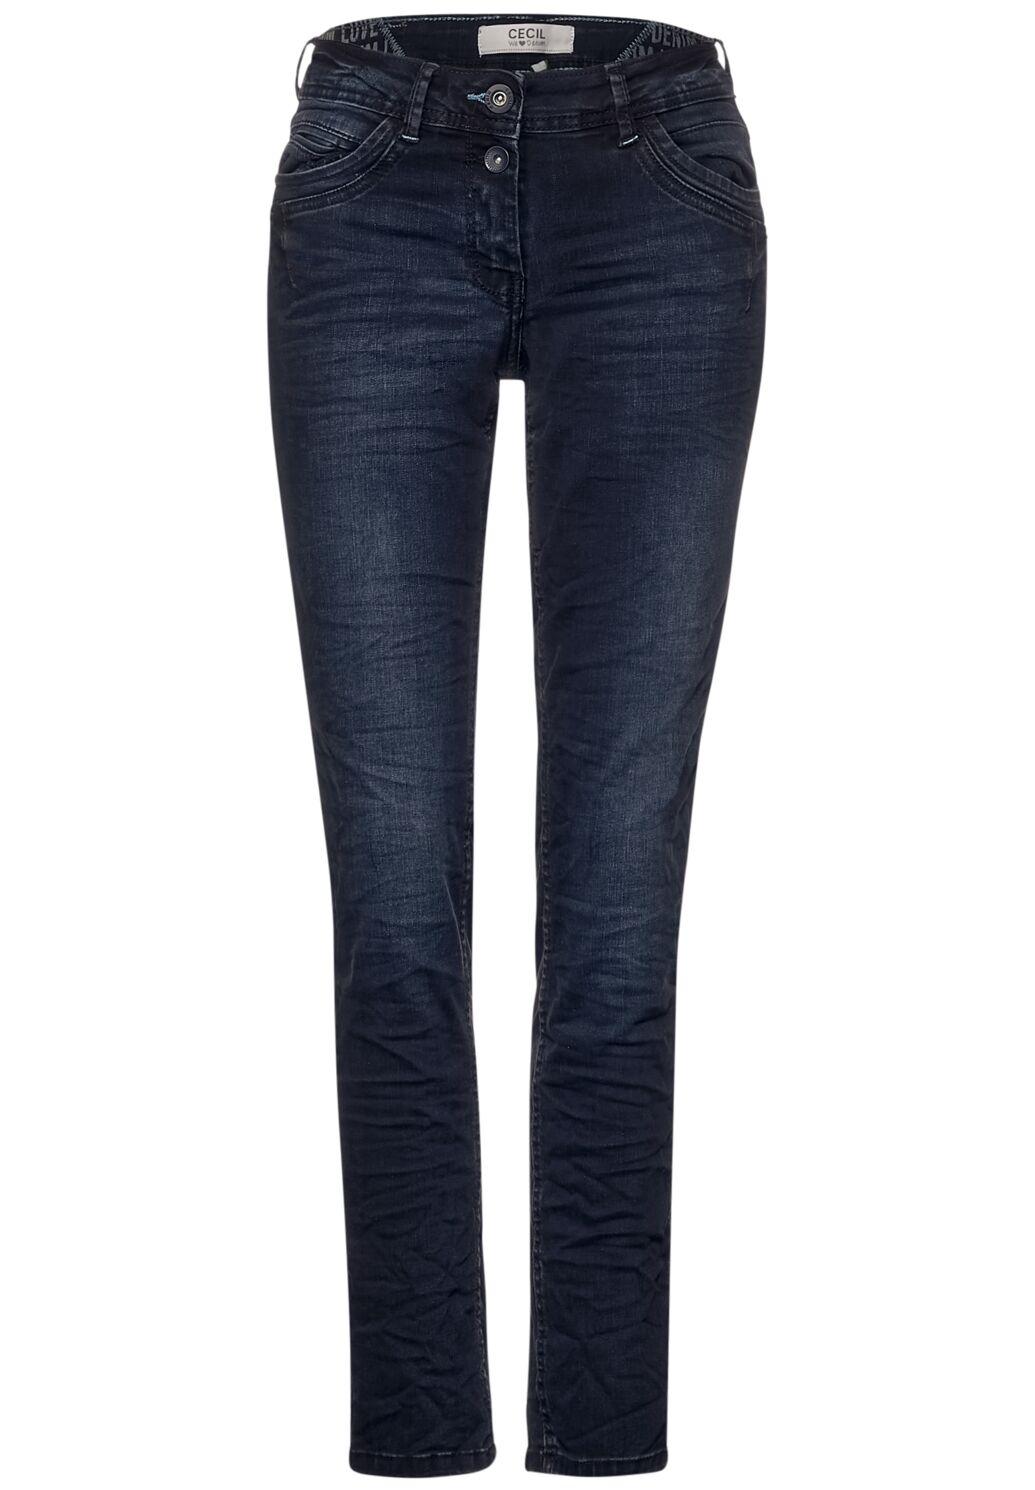 CECIL - Loose Fit Jeans Hose Style Scarlett B375275-10770